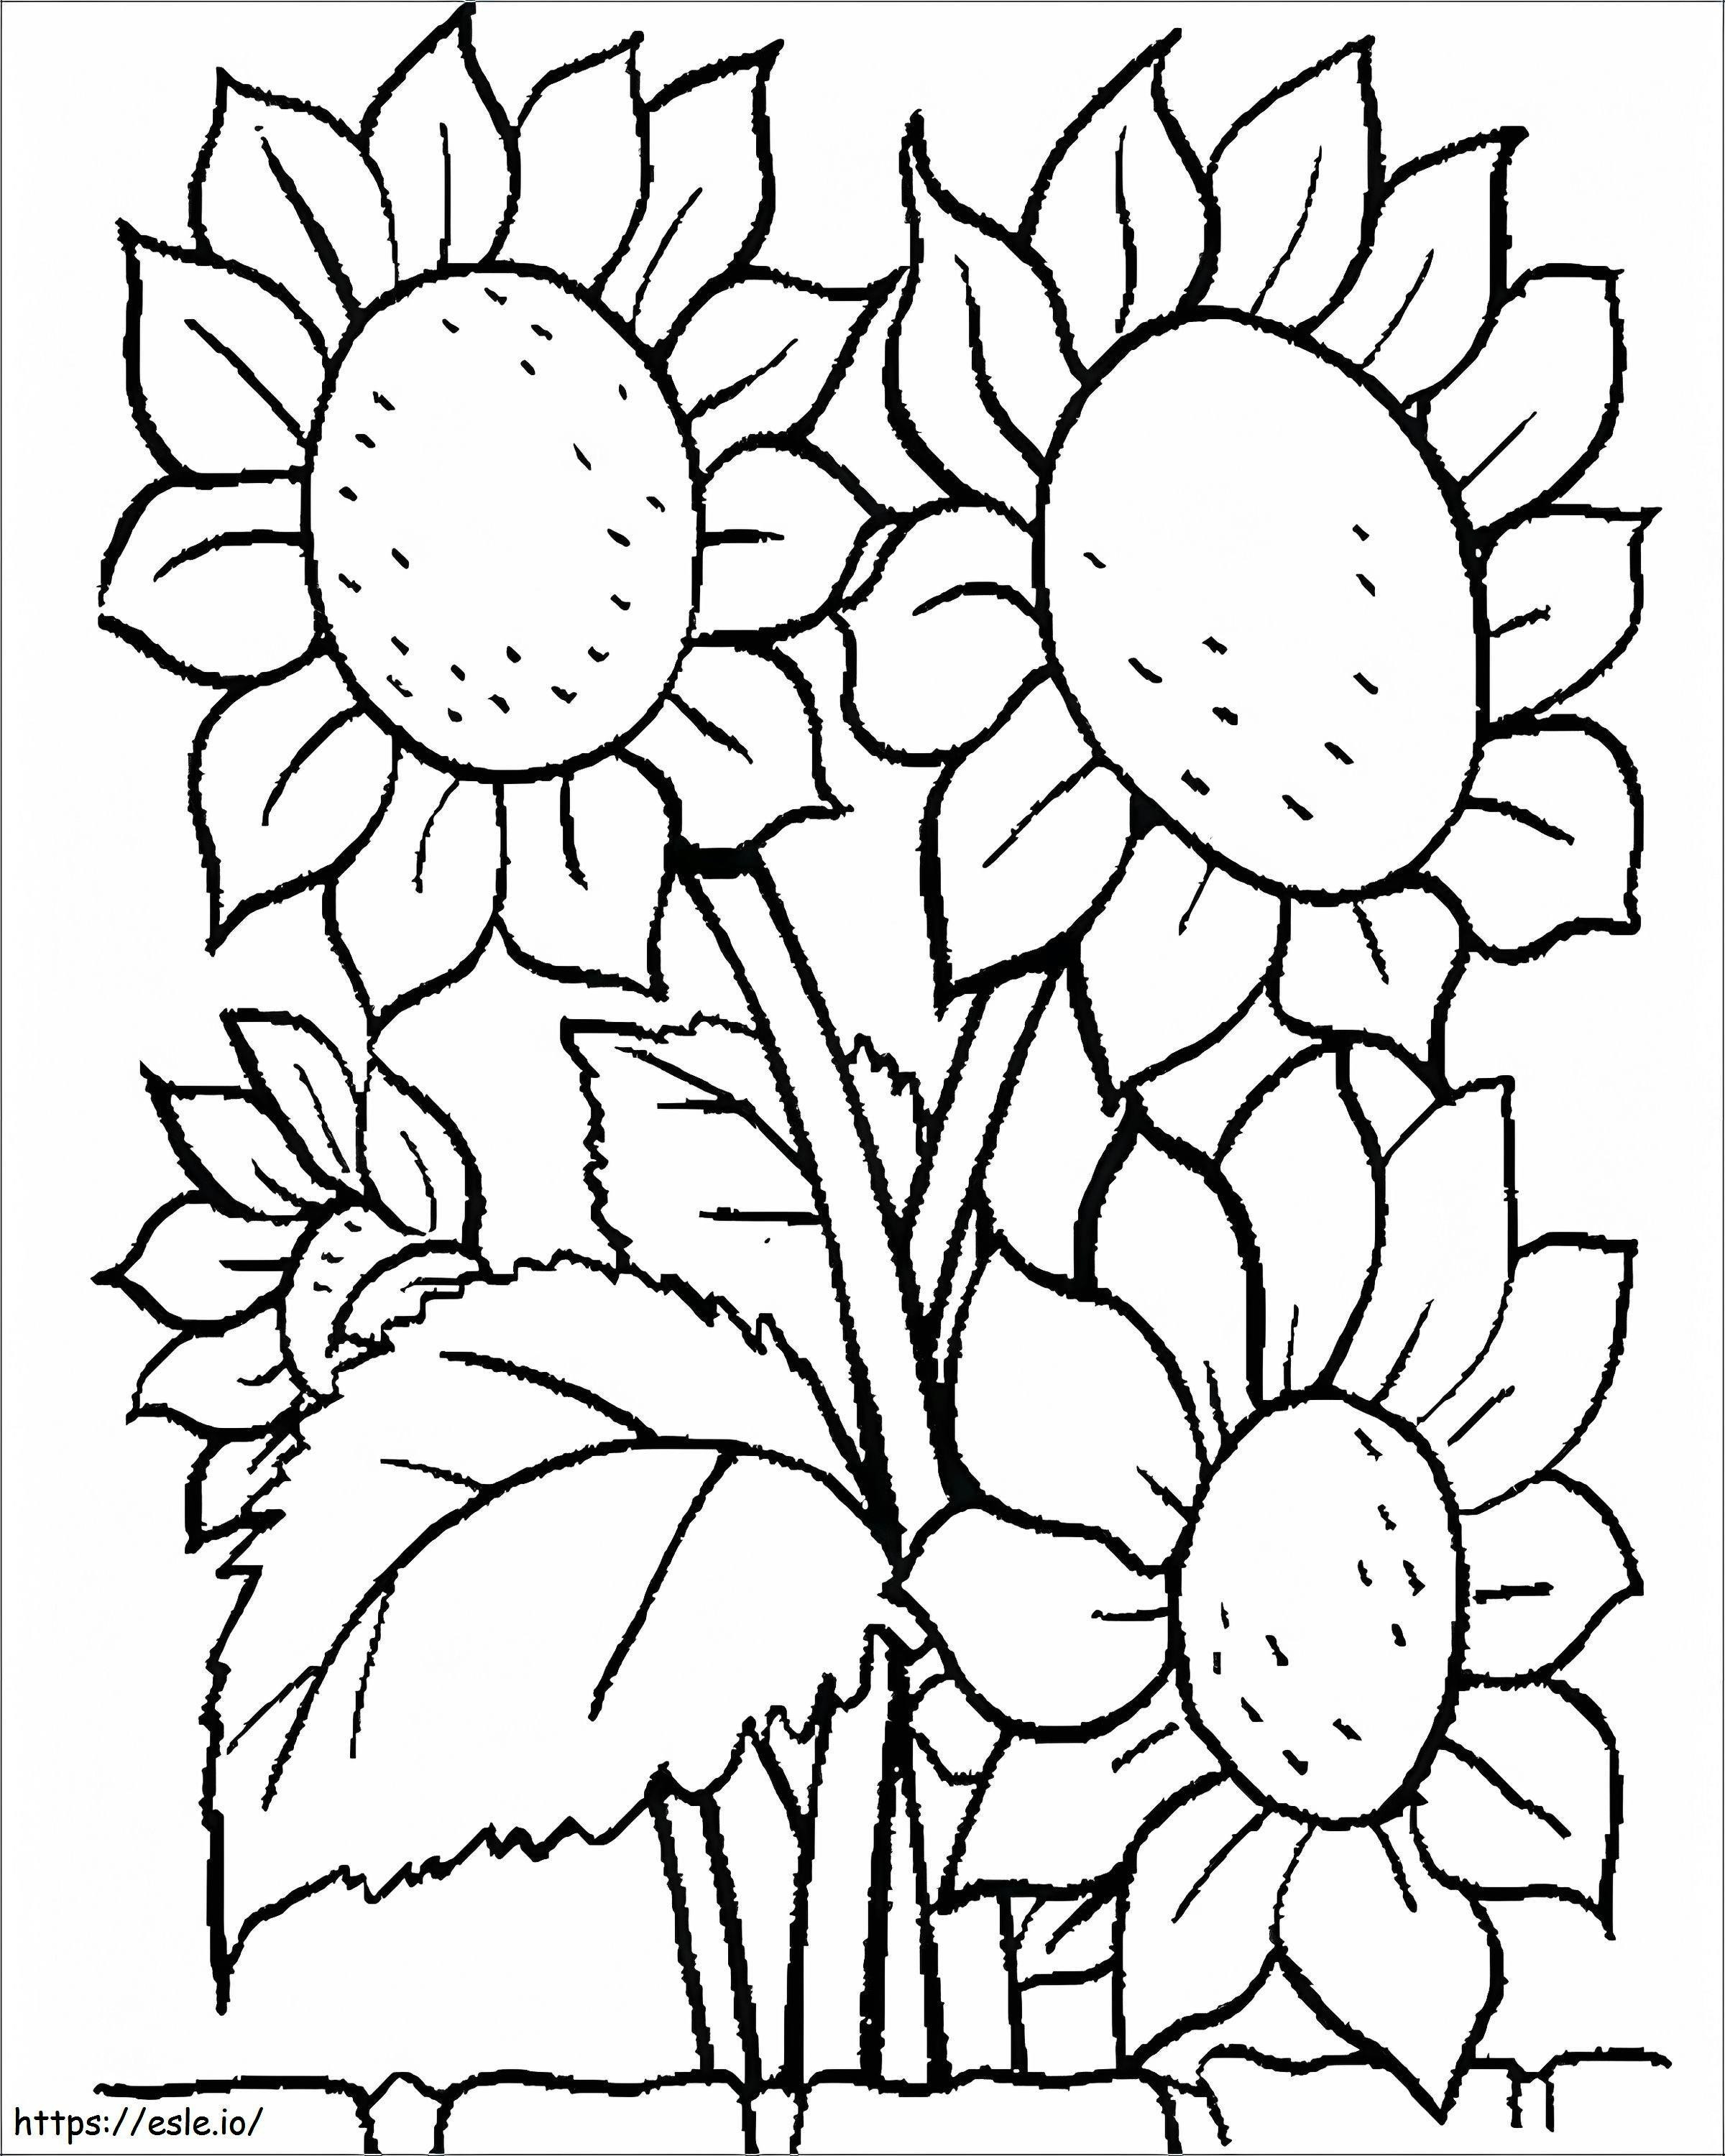 1539919156 Flower Coloring Sheets For Preschoolers Easy Printable Flower Free Flower Coloring Pictures Flowers Printable Flower Coloring Printable Flower Coloring Sheets For Prescho coloring page